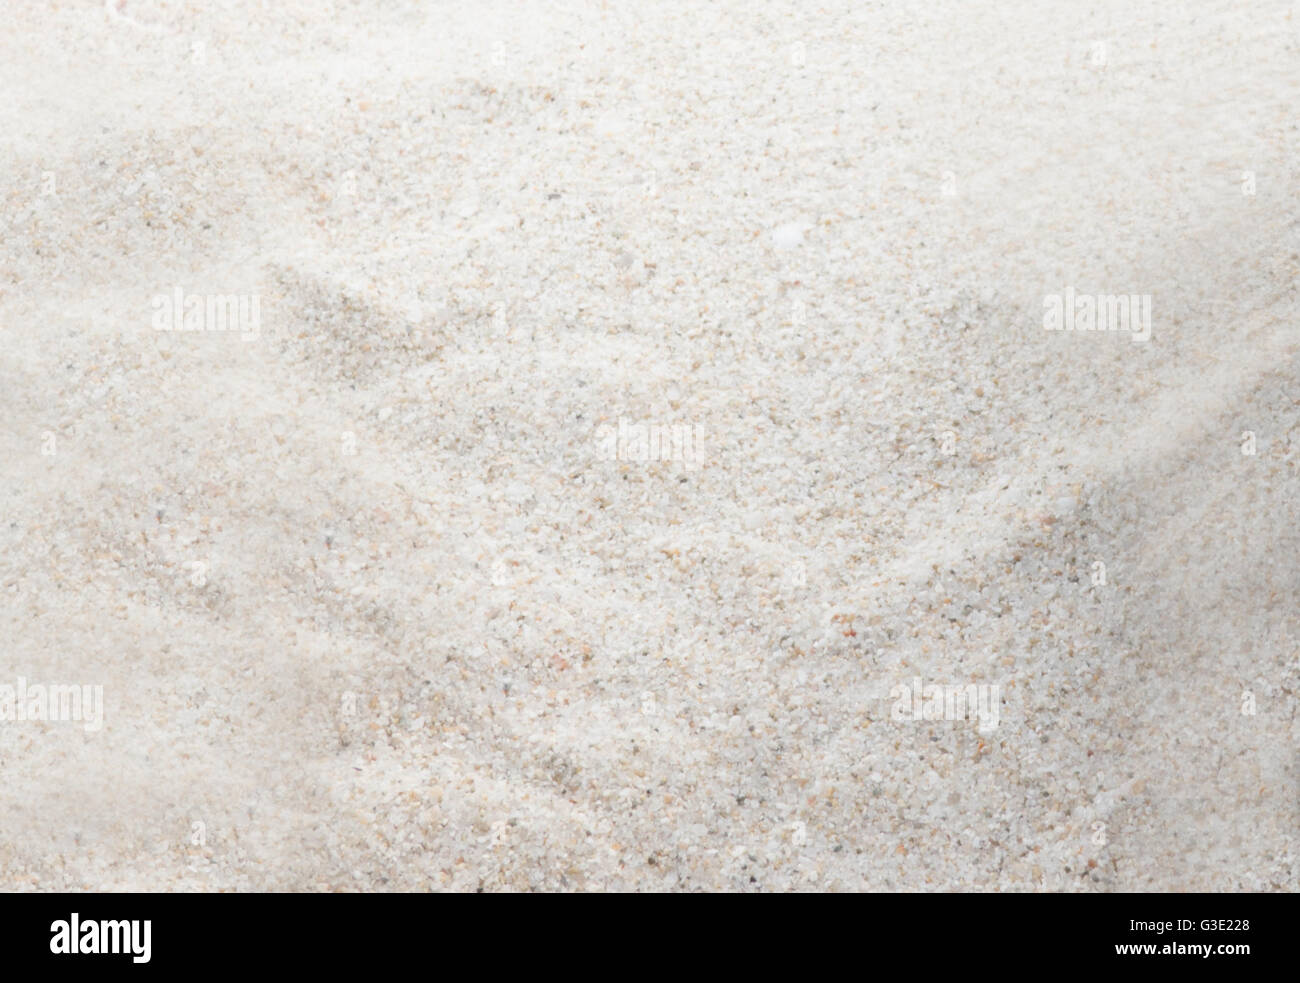 Sandy beach fine sand texture background holiday concept background Stock Photo